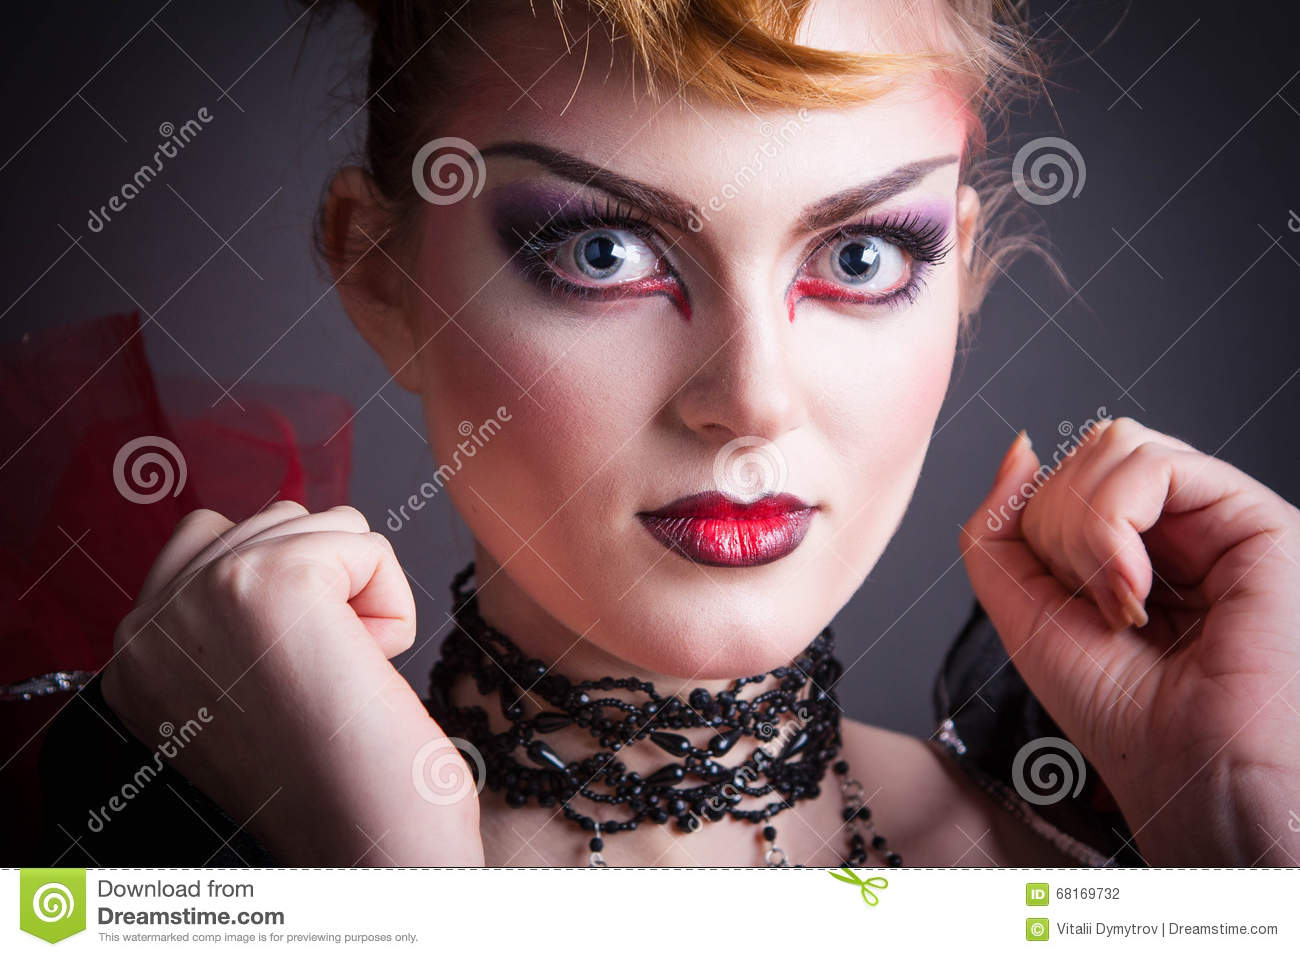 Evil Queen Eye Makeup Creative Makeup And Blood Image Of The Evil Queen Stock Photo